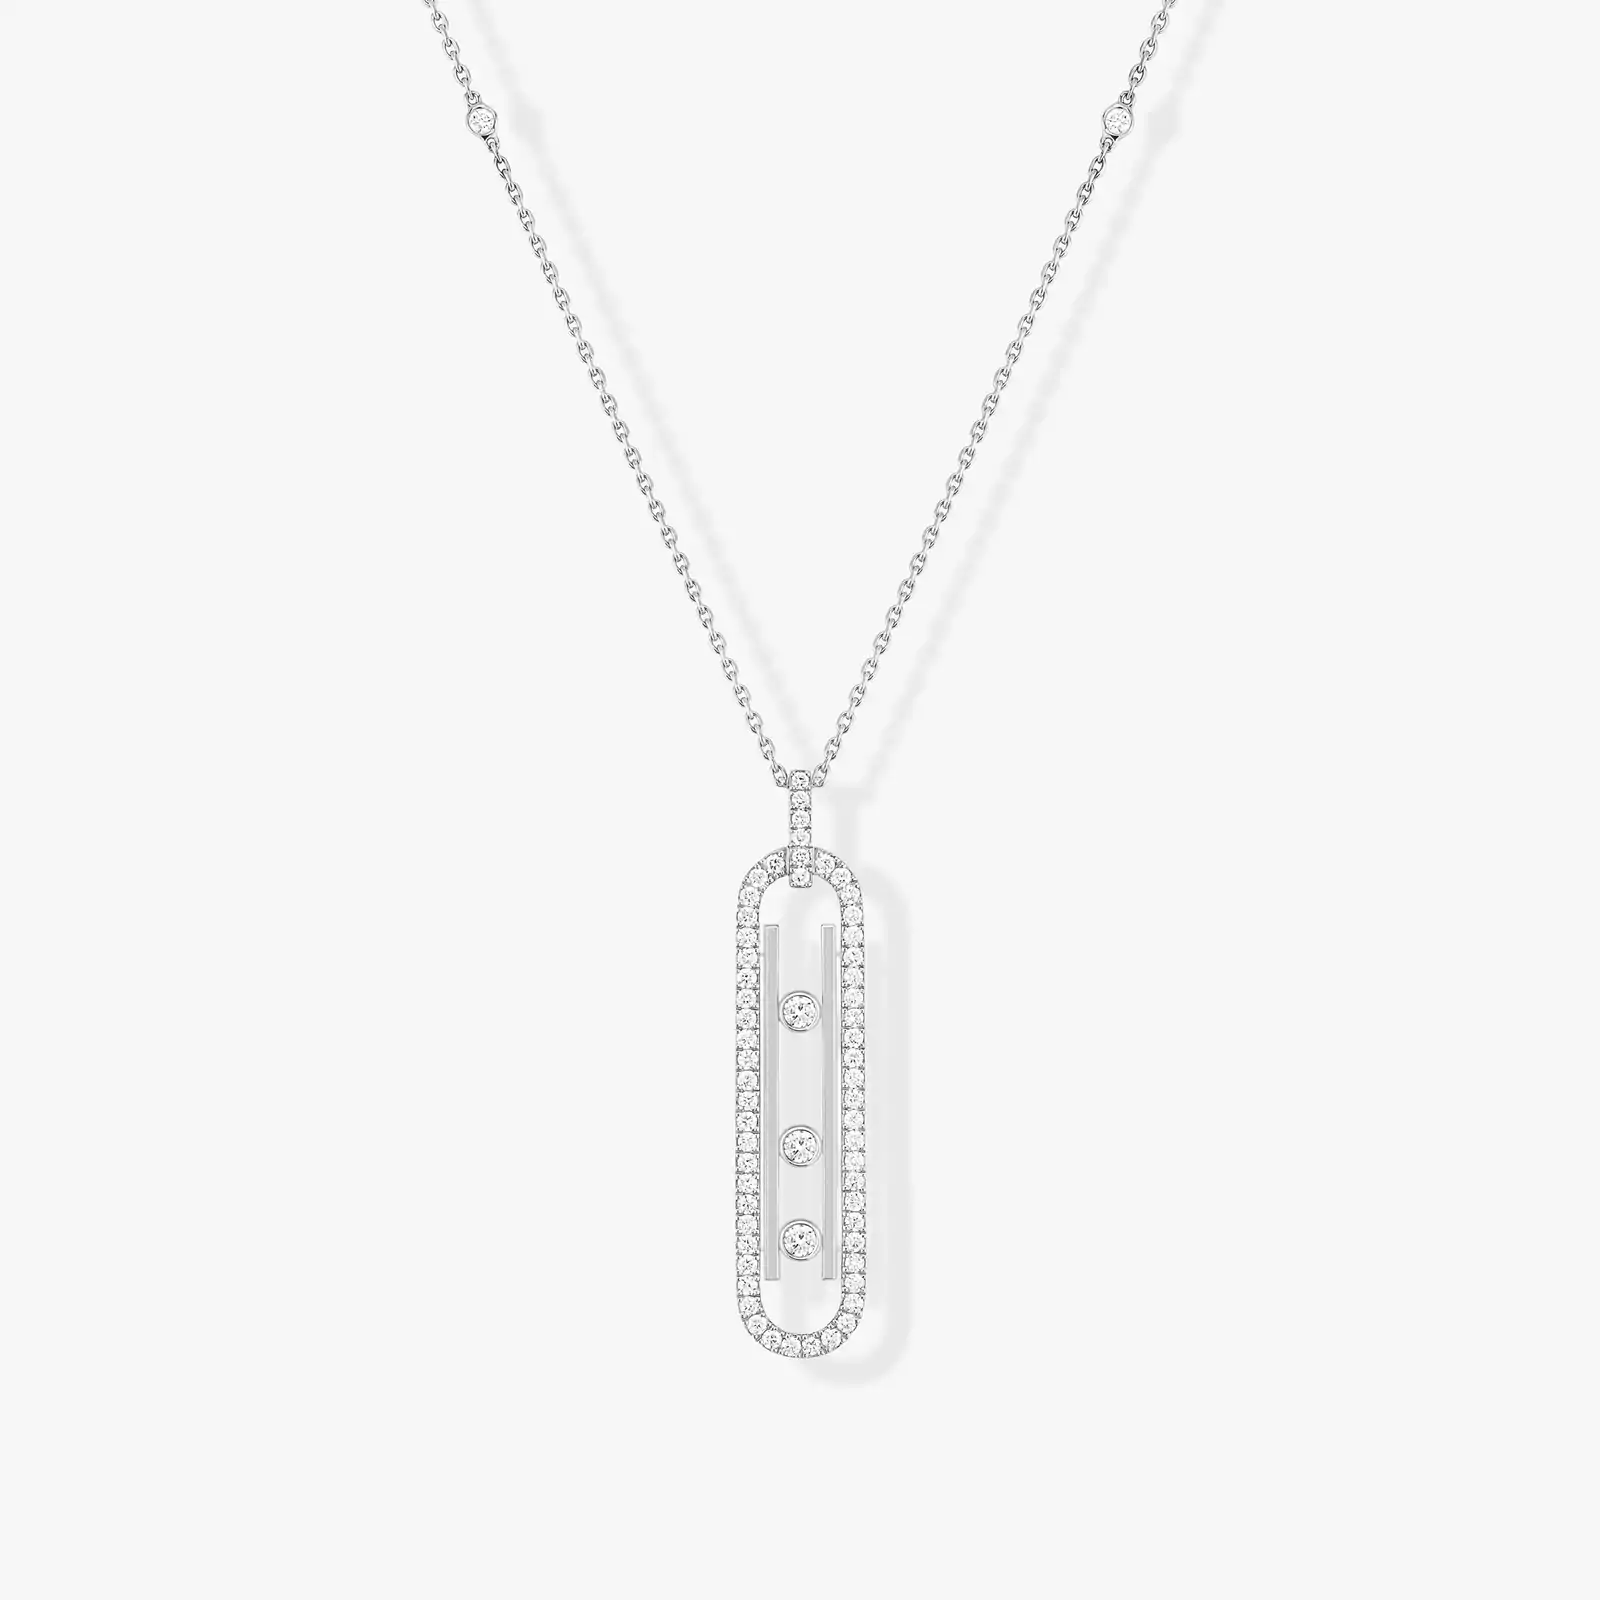 Collier Femme Or Blanc Diamant Move 10th PM  10032-WG